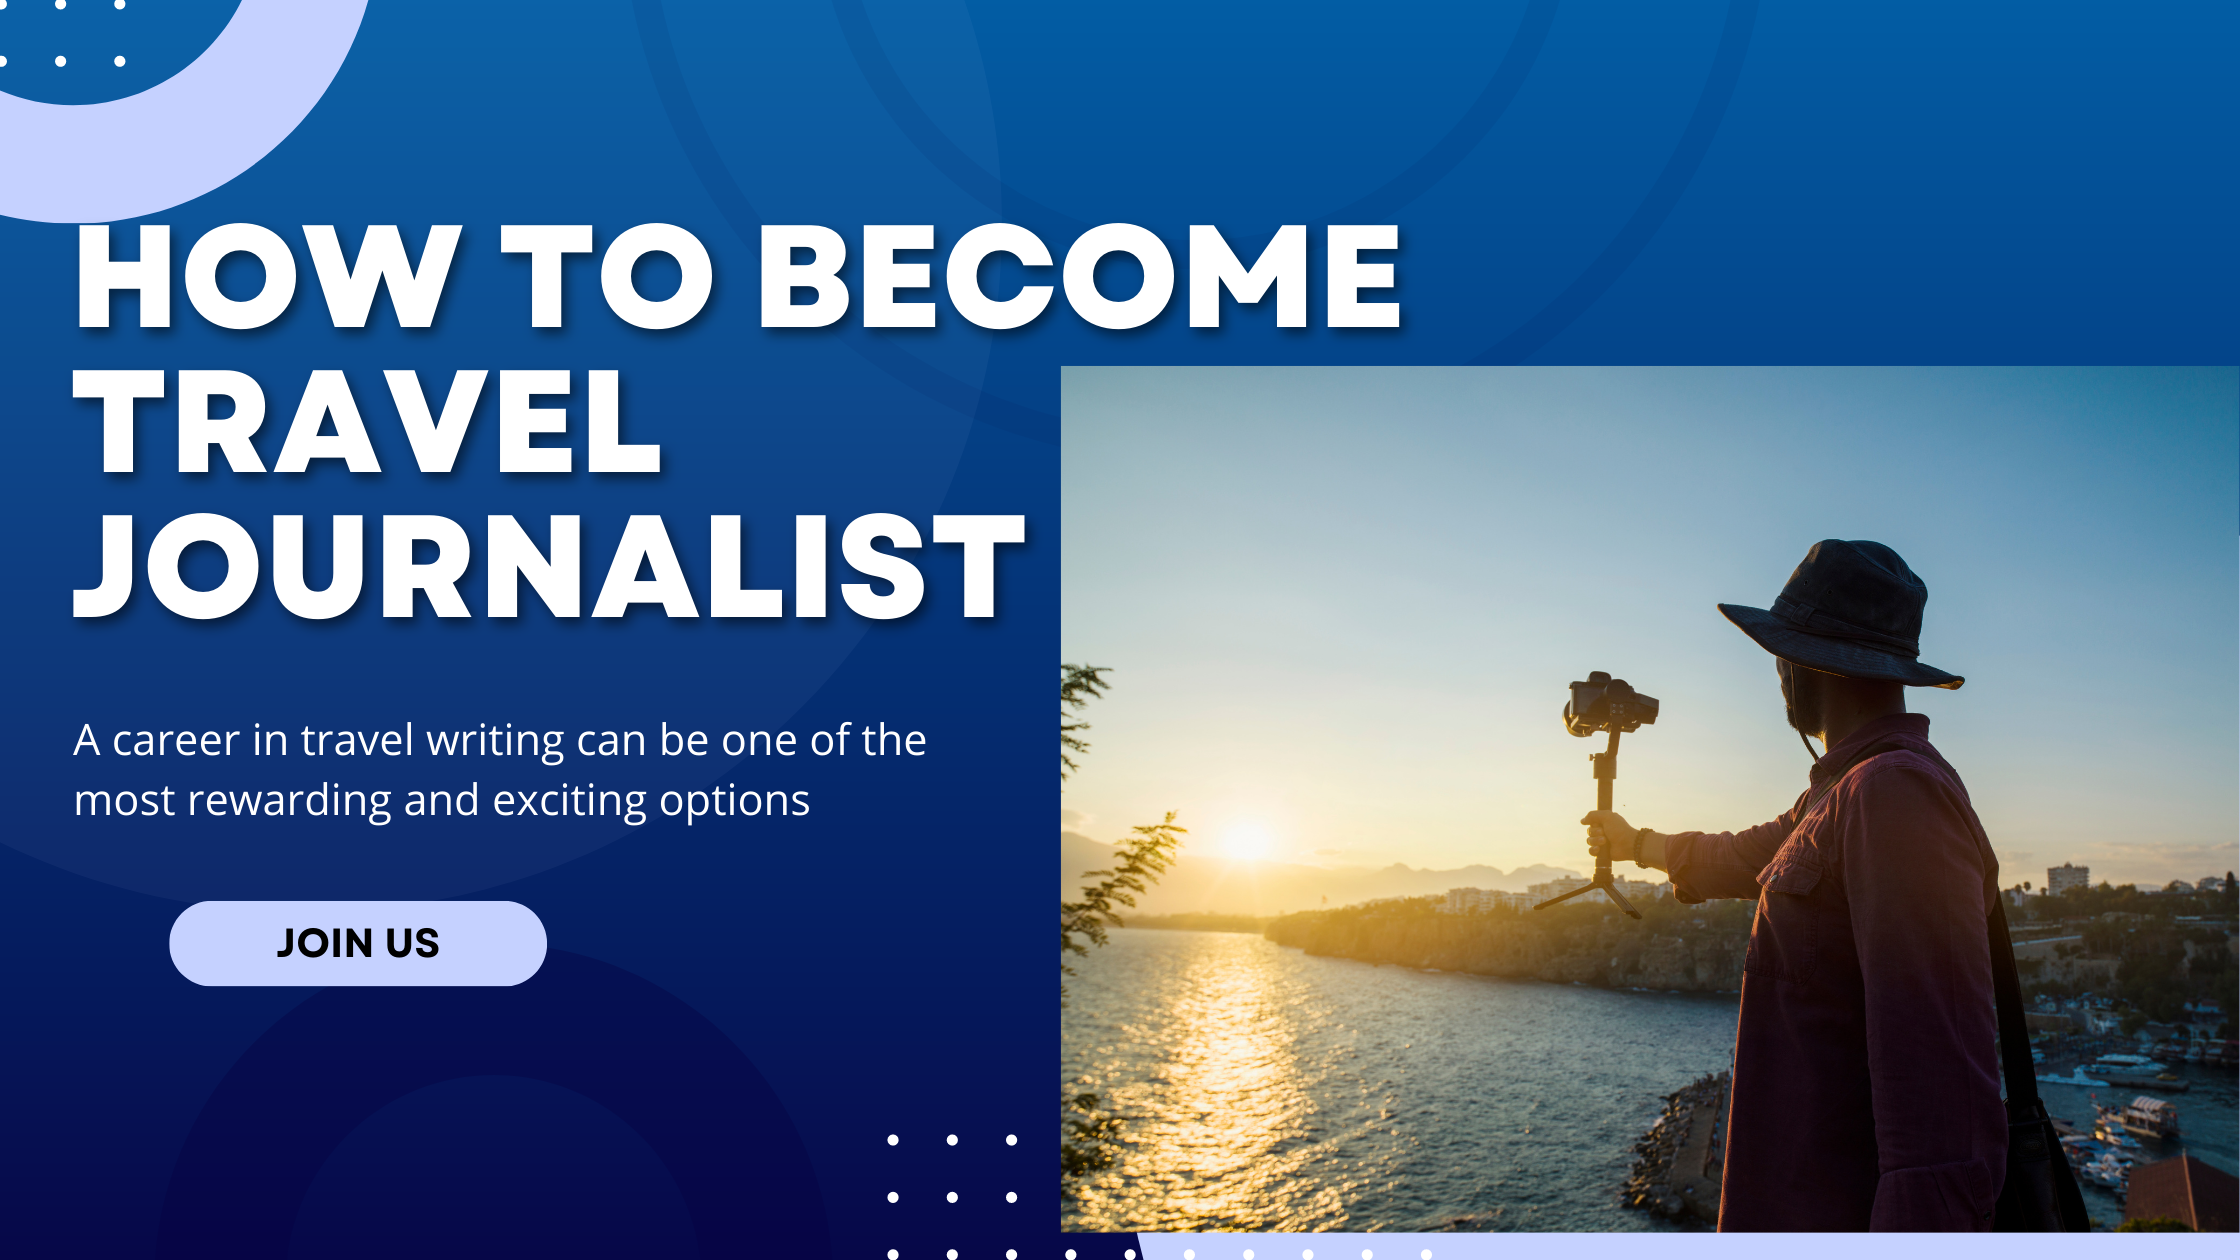 How To Become Travel Journalist